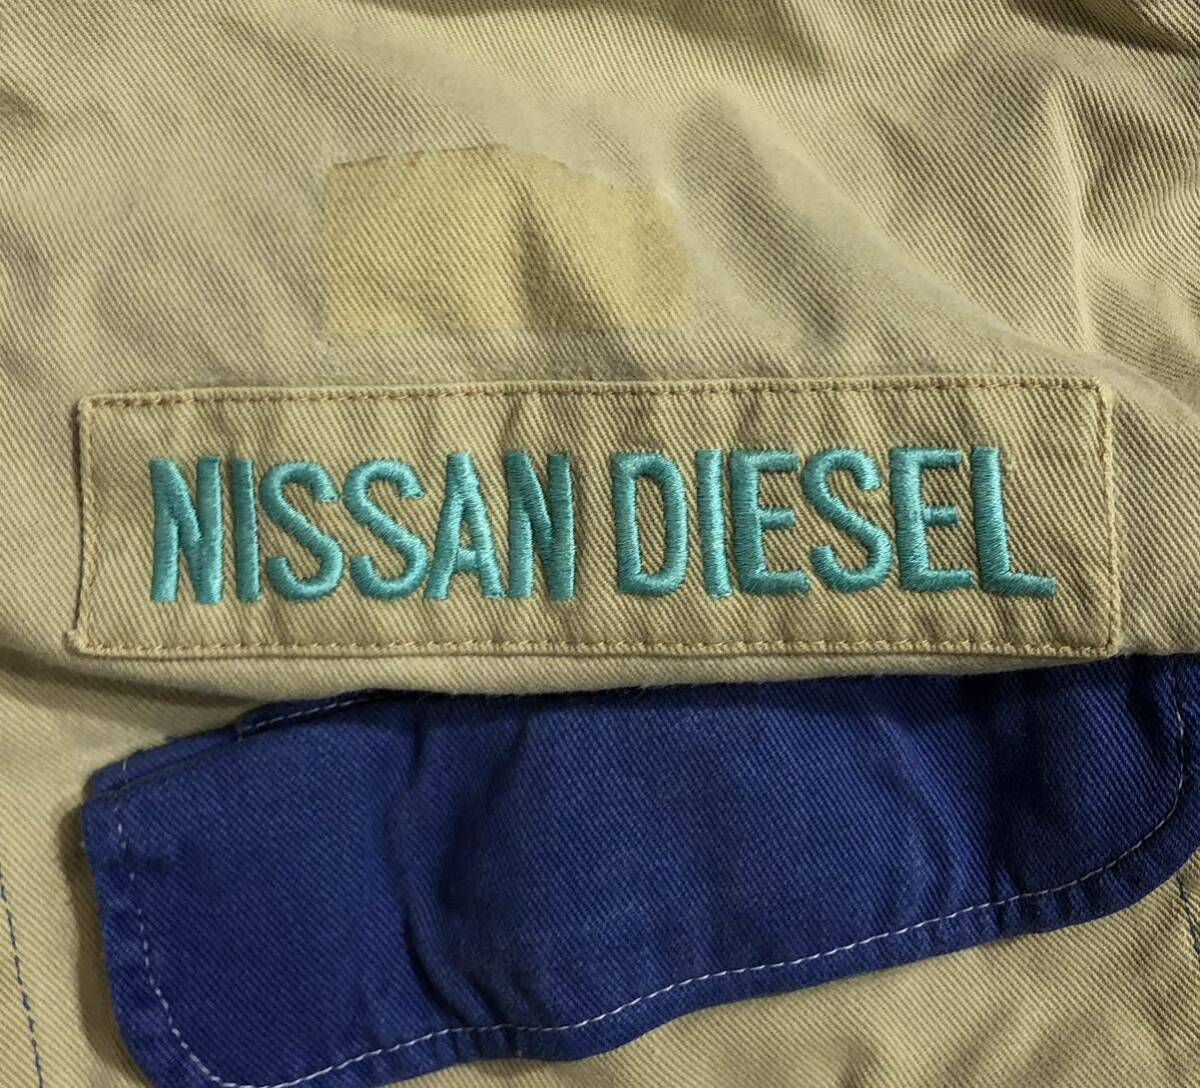  large size # Nissan NISSAN Nissan # Logo embroidery print mechanism nik suit coverall coveralls all-in-one blue × beige 5L